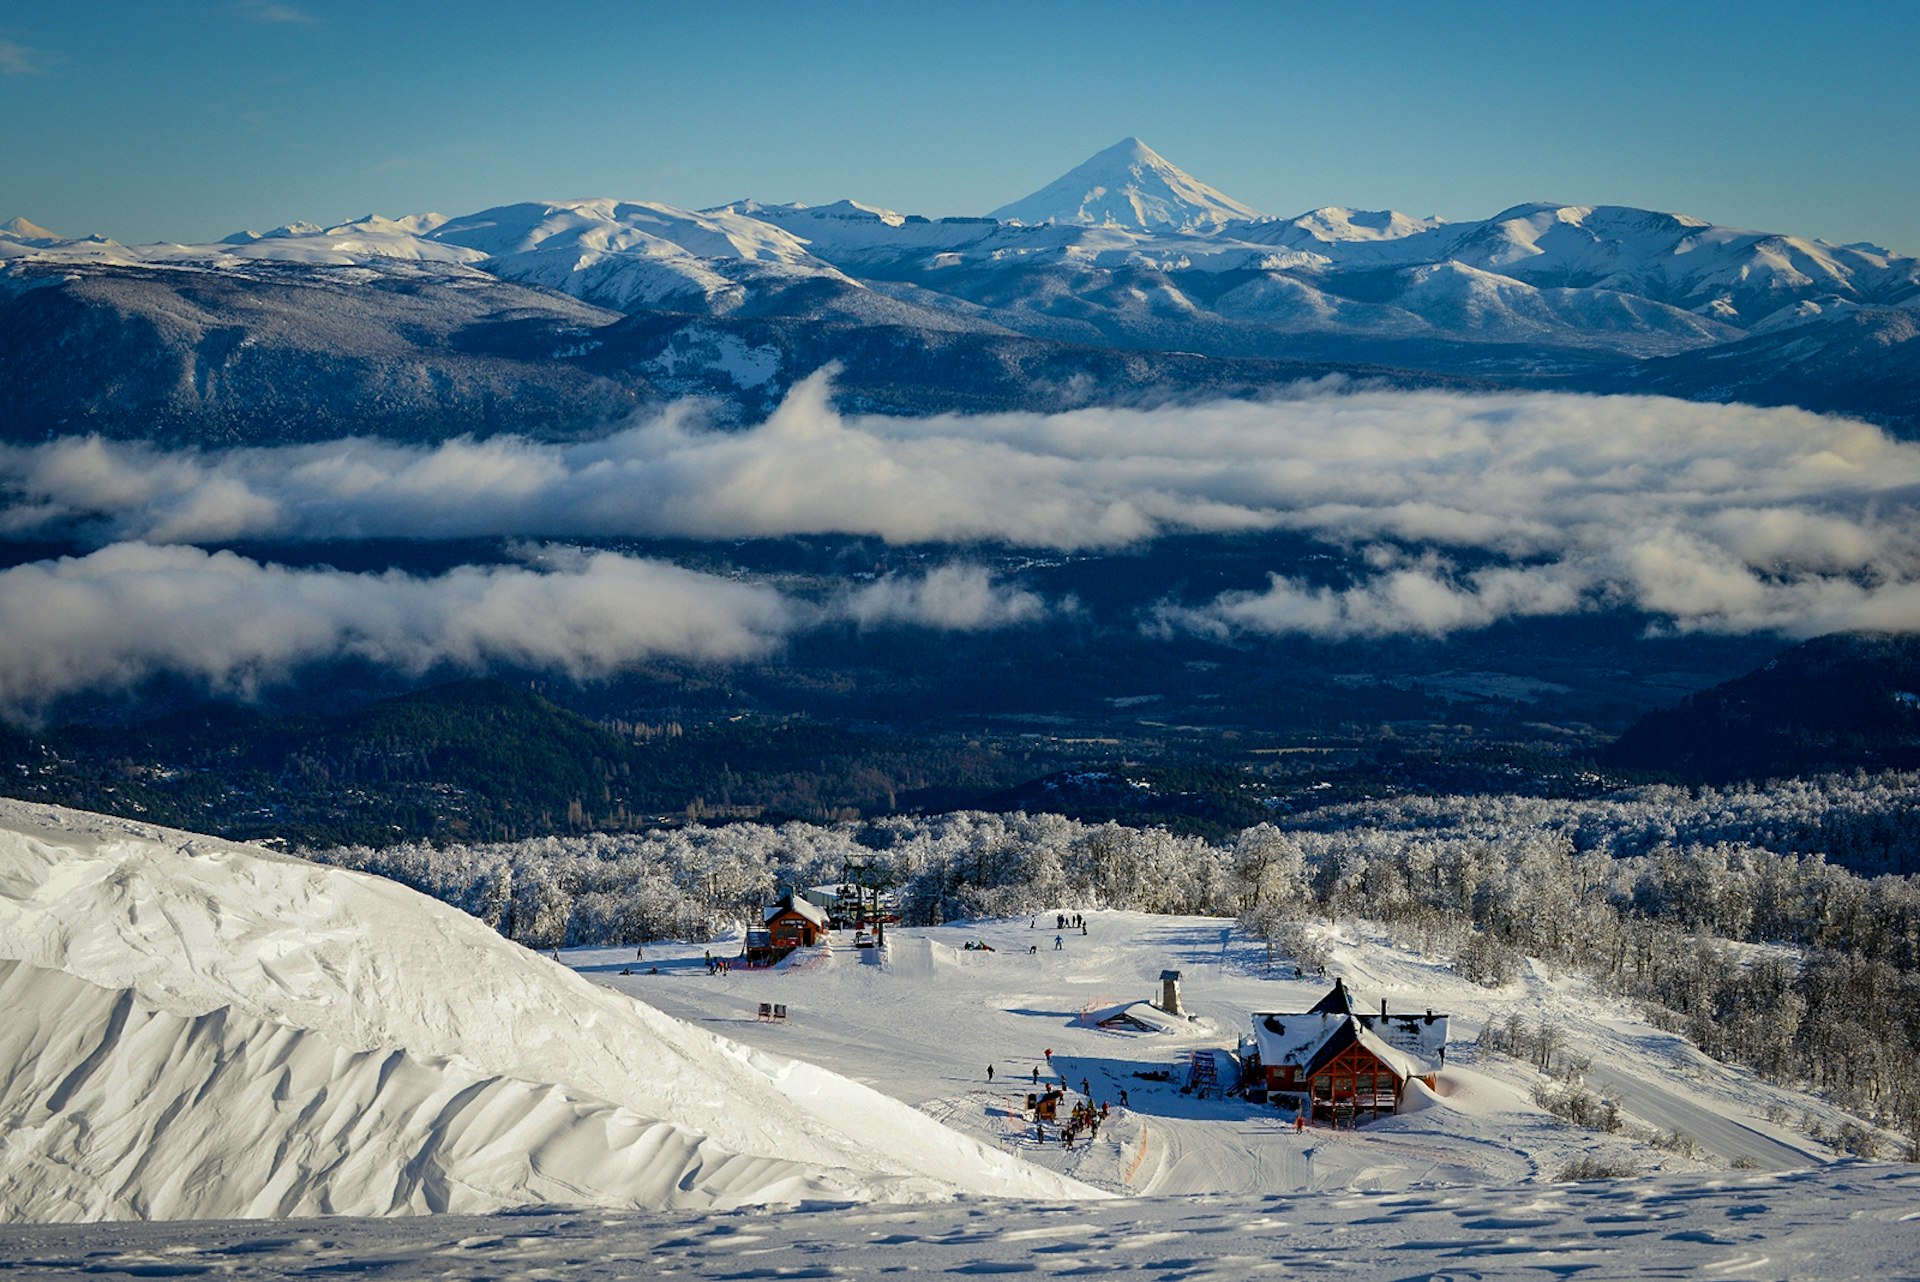 A view of a rocky mountain range from the top of a snowy hill overlooking a ski lodge in Chapelco